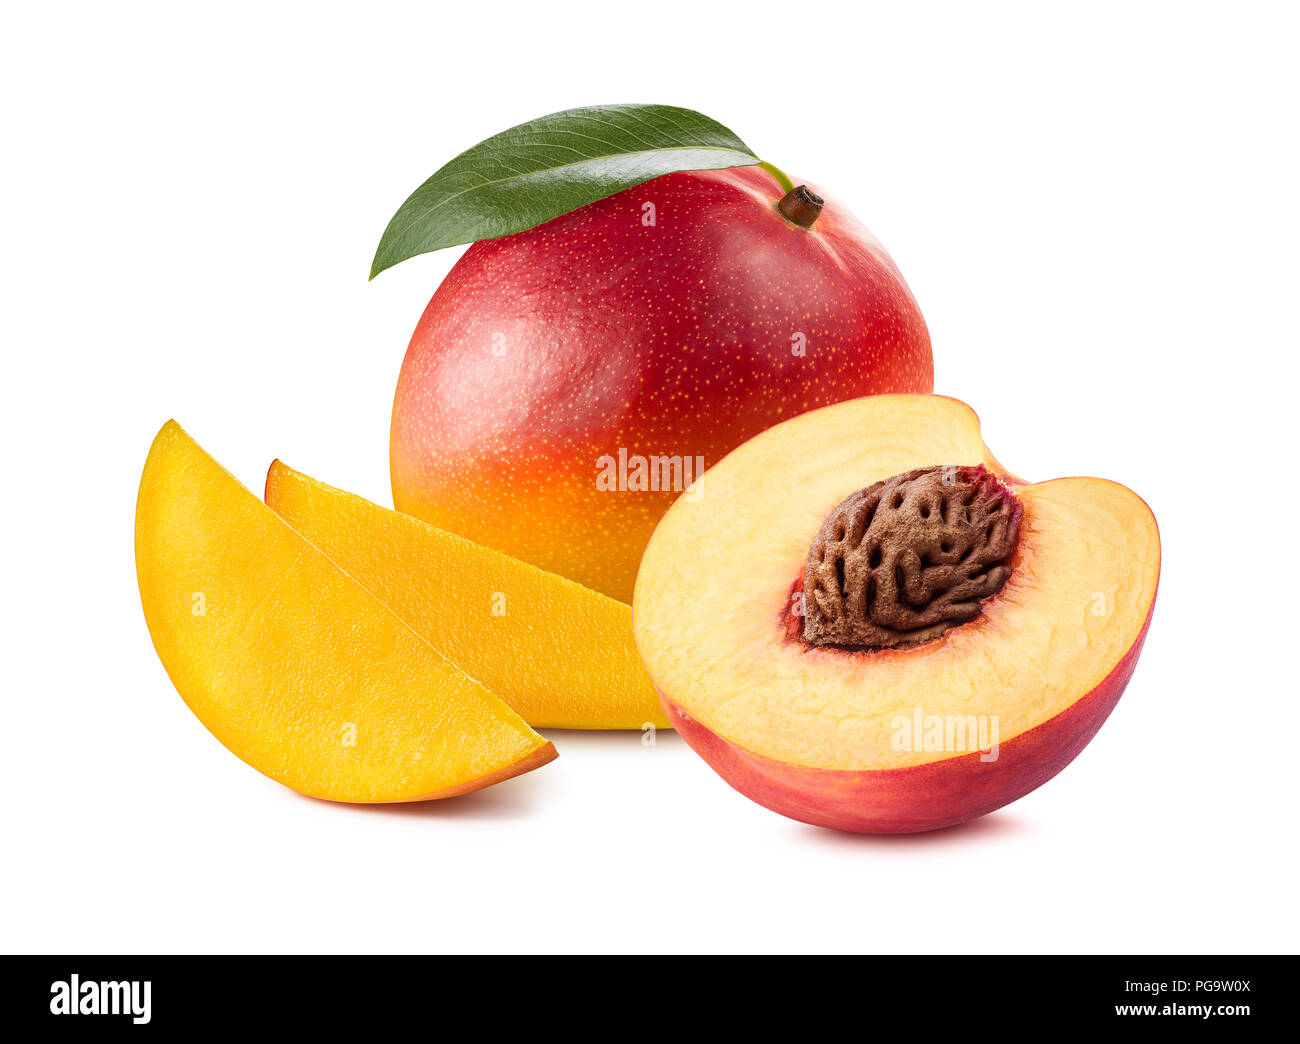 Mango peach half isolated on white background as package design element Stock Photo